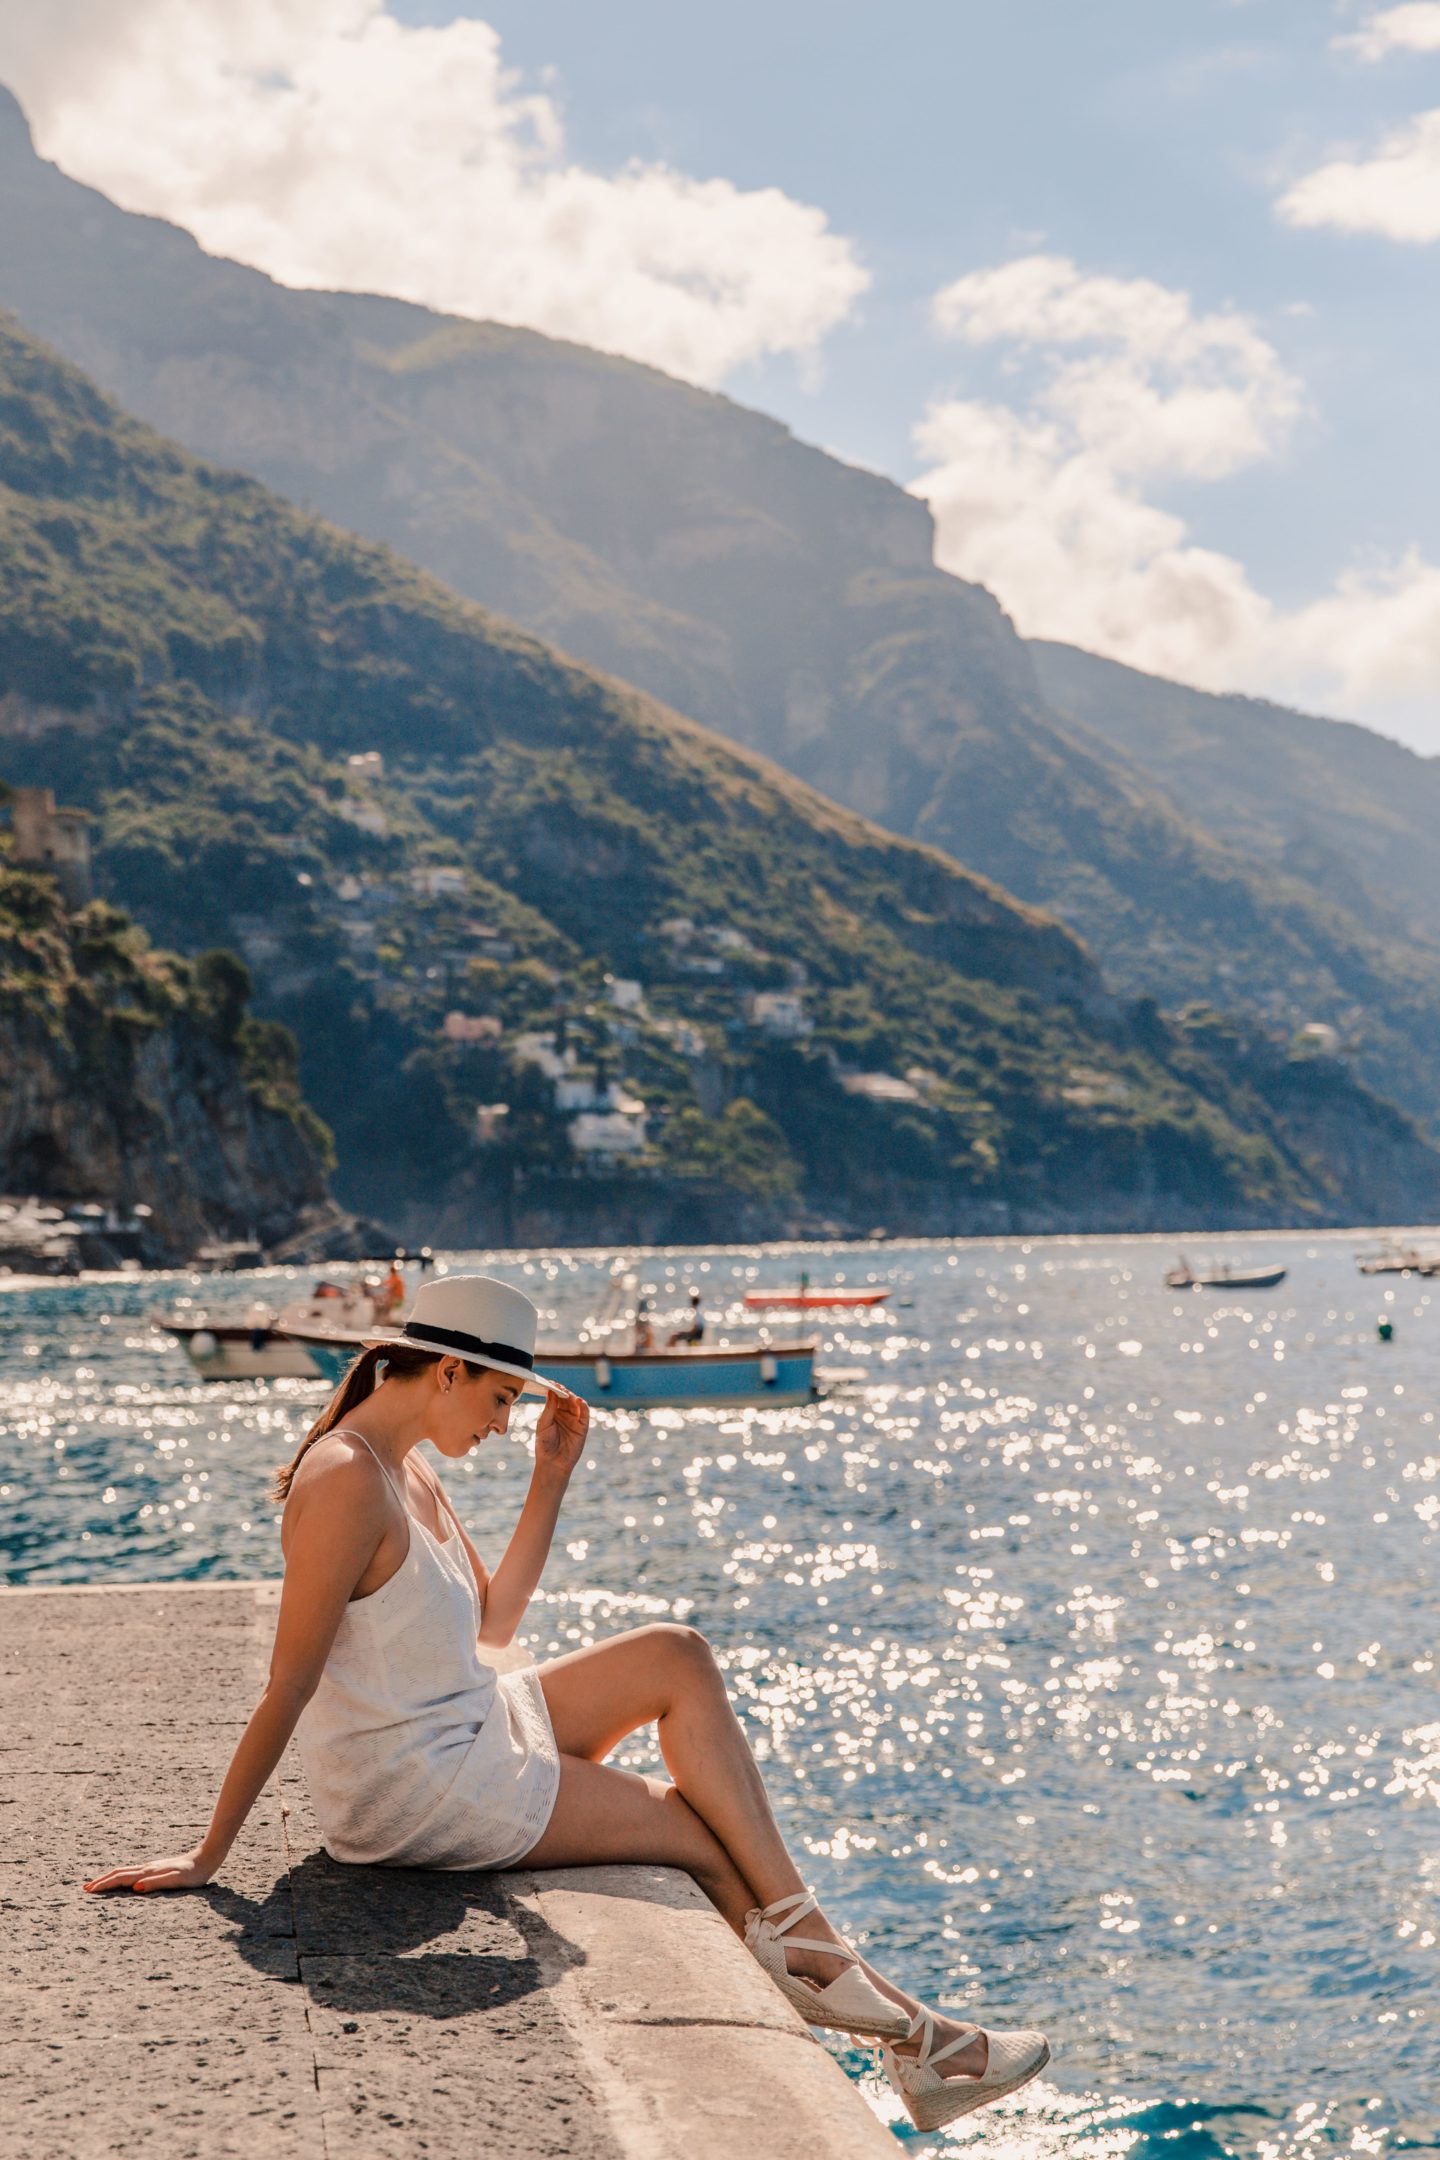 The Best Positano Instagram Shots | 12 Beautiful Shots You Can't Miss: The Marina 